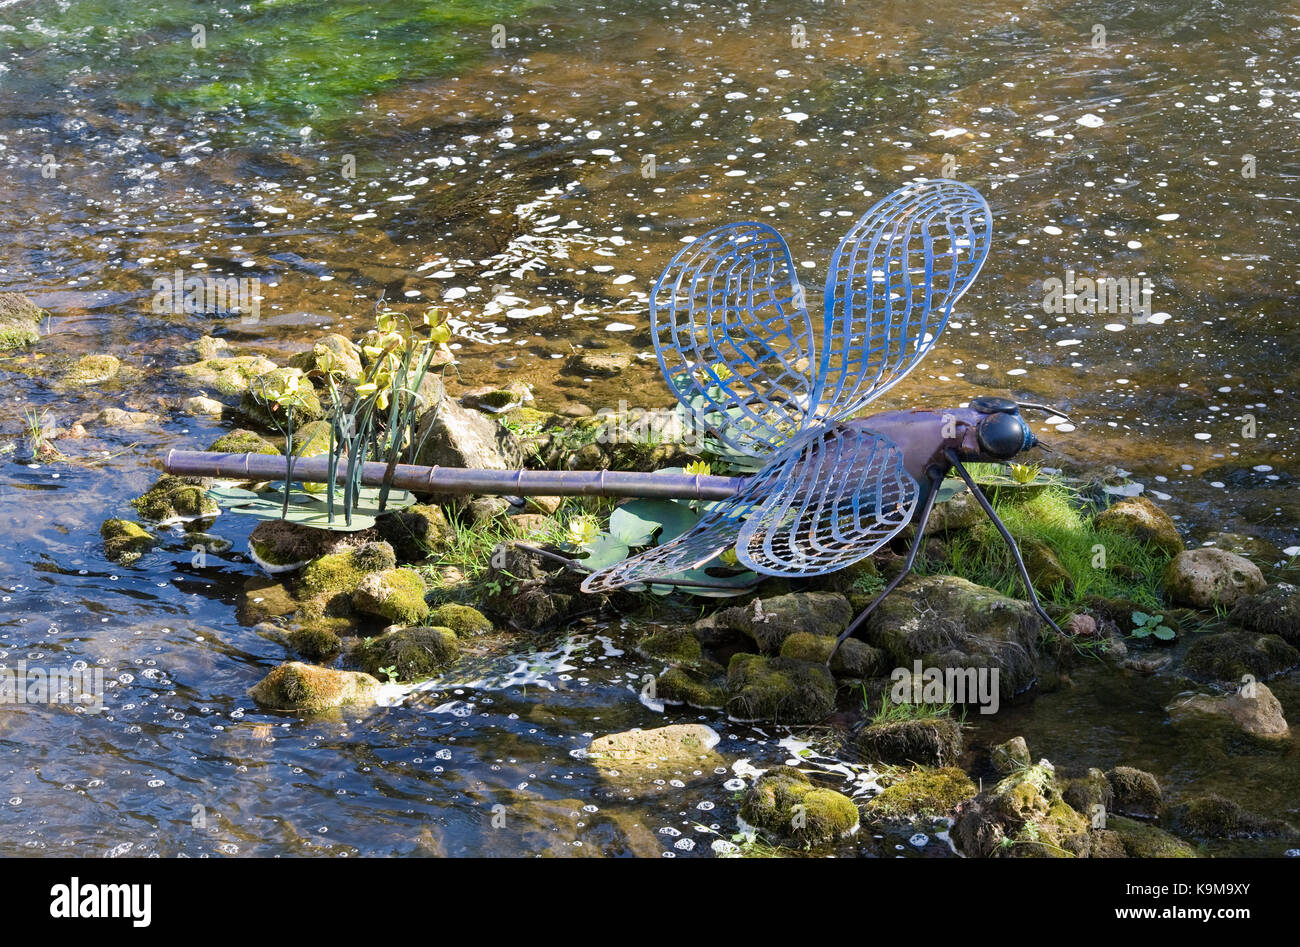 Metal dragonfly sculpture on the River Dronne at Brantome, France. Stock Photo